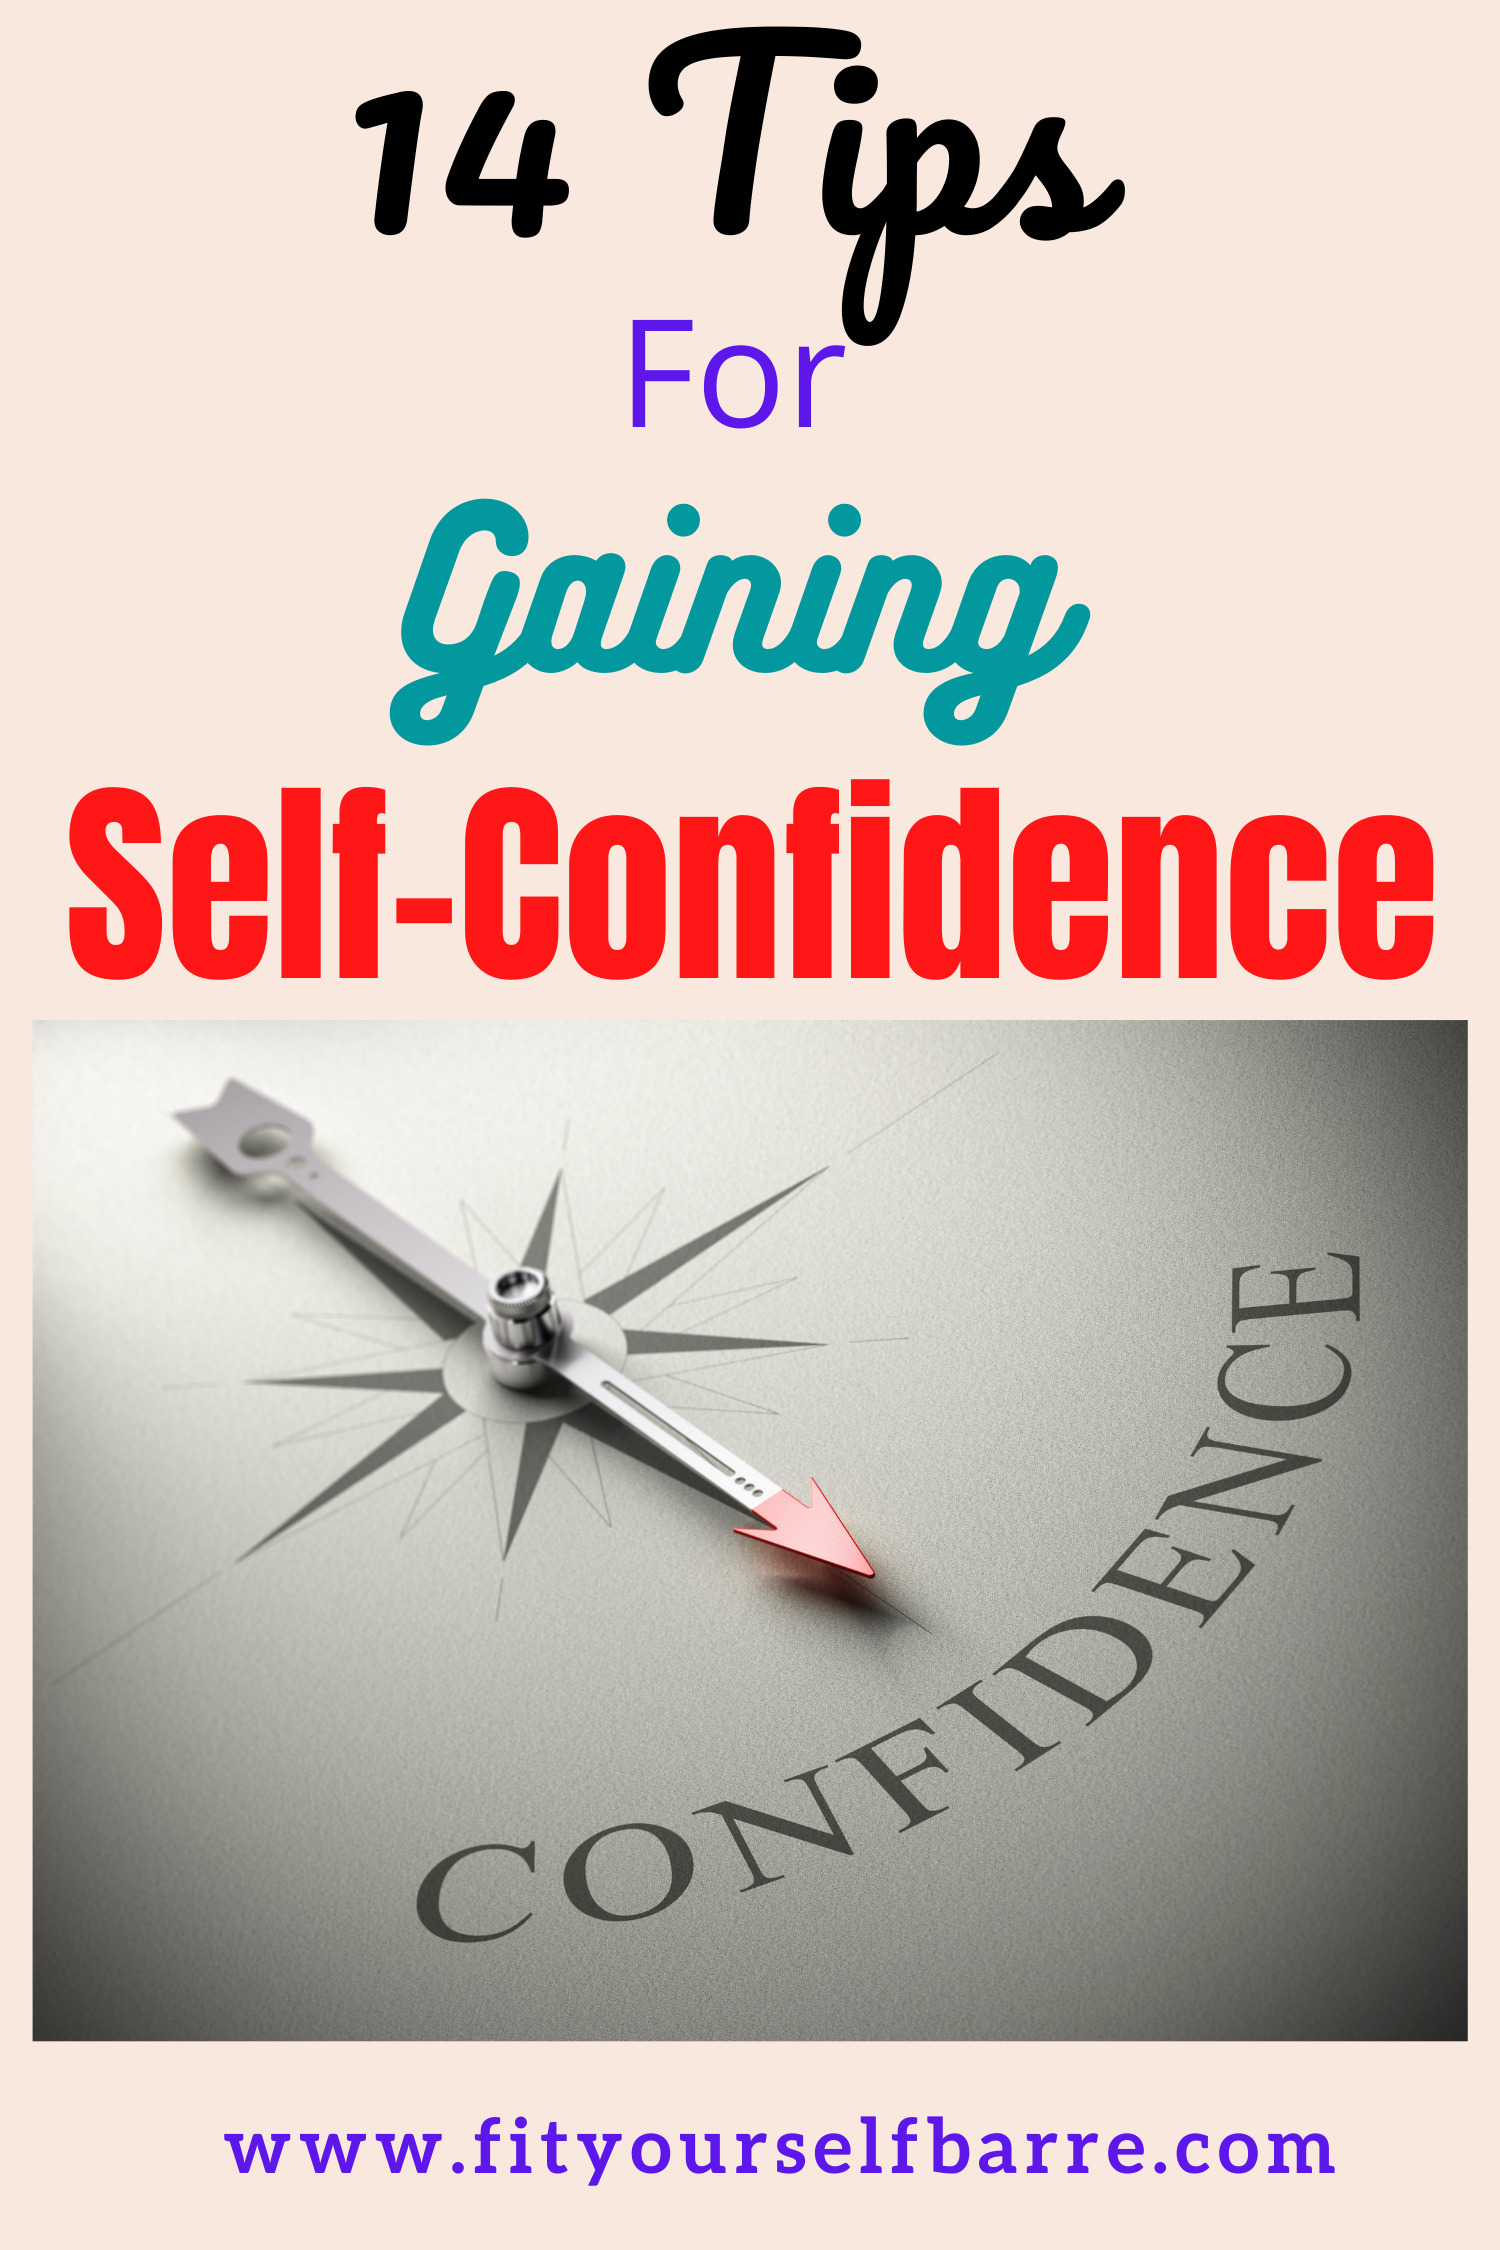 gaining-self-confidence-a-clock-arrow-pointing-at-the-word-confidence-3D-render